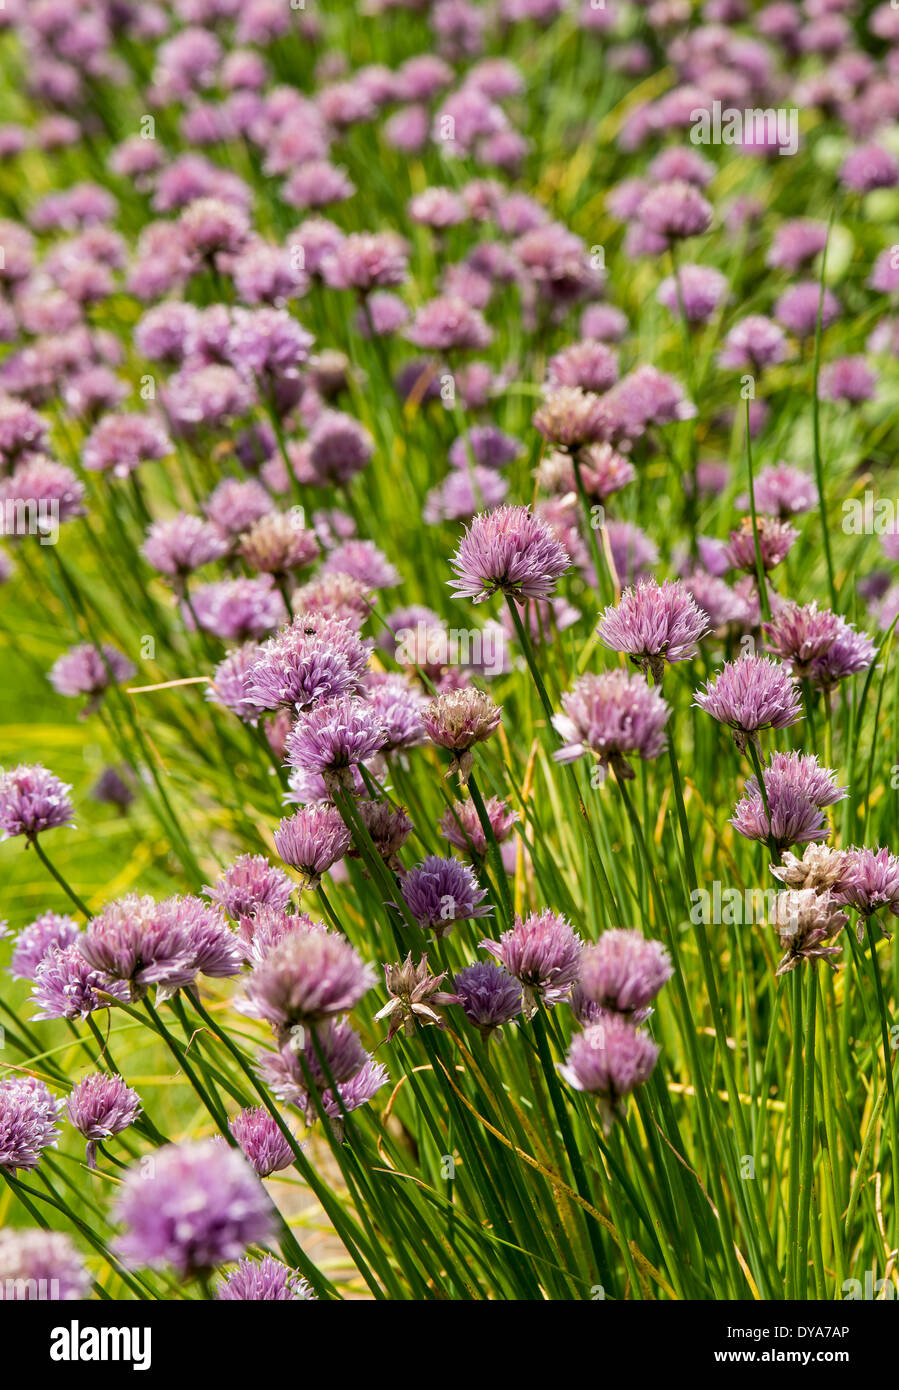 Chives, chive plants in bloom, pink, purple flowers Stock Photo